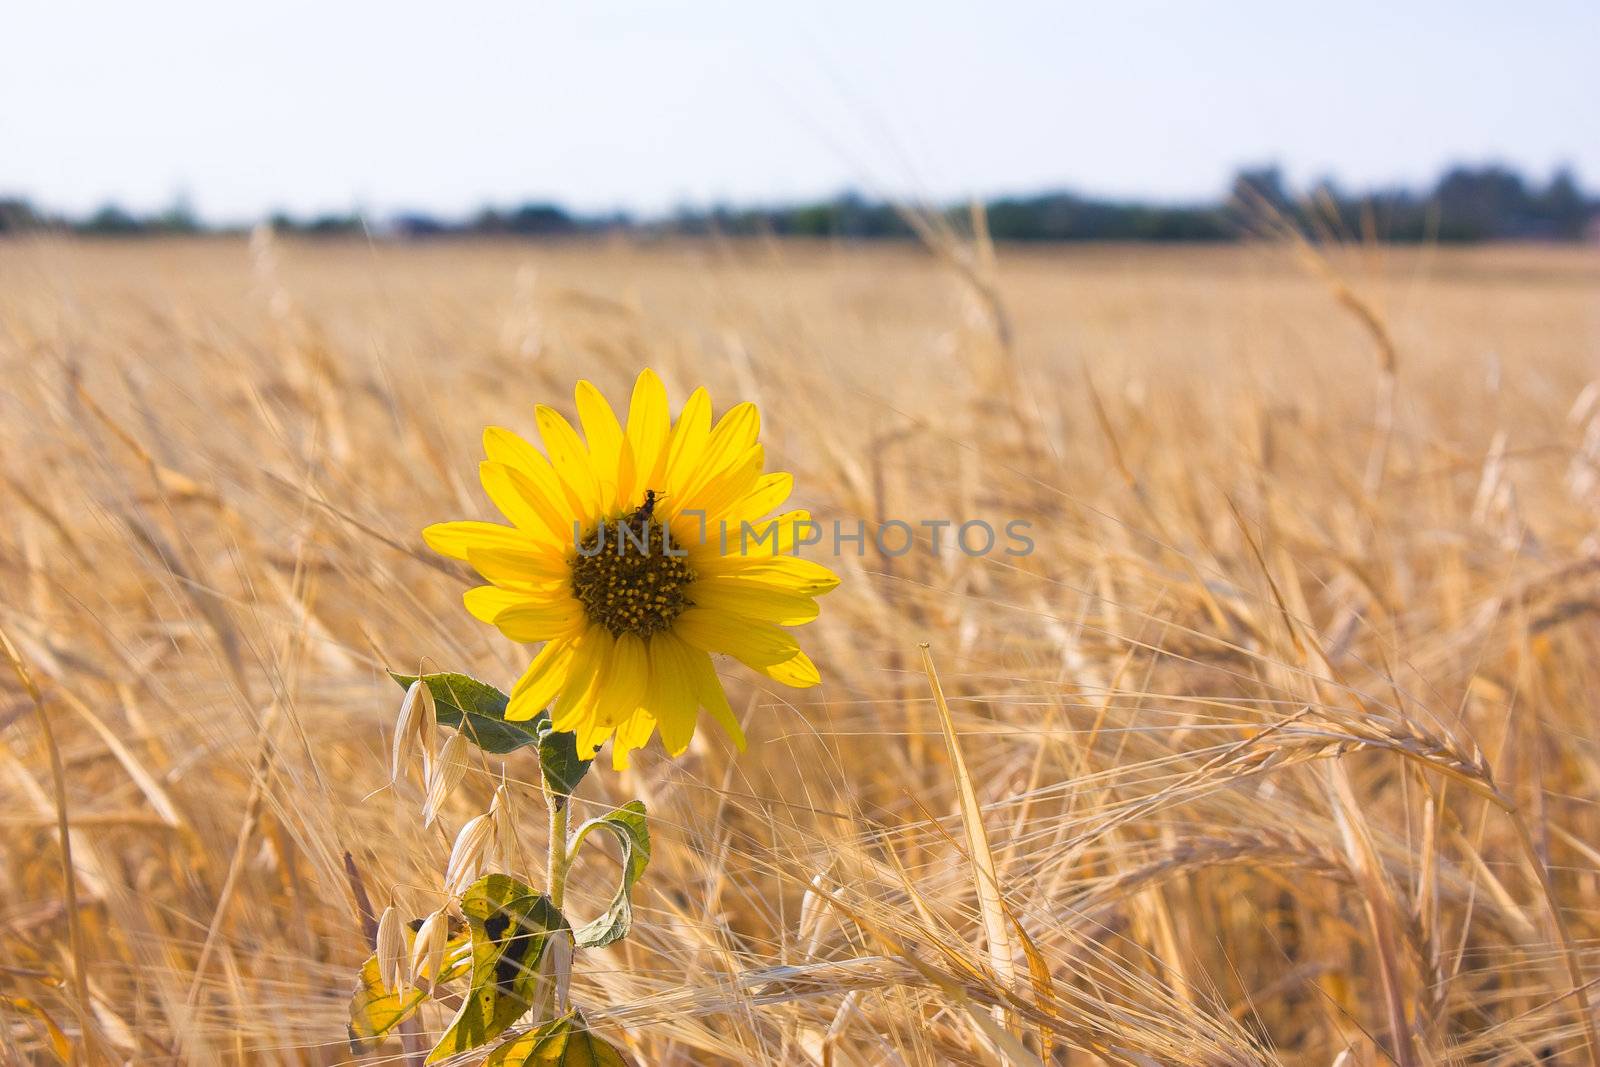 sunflower seeds at the barley field